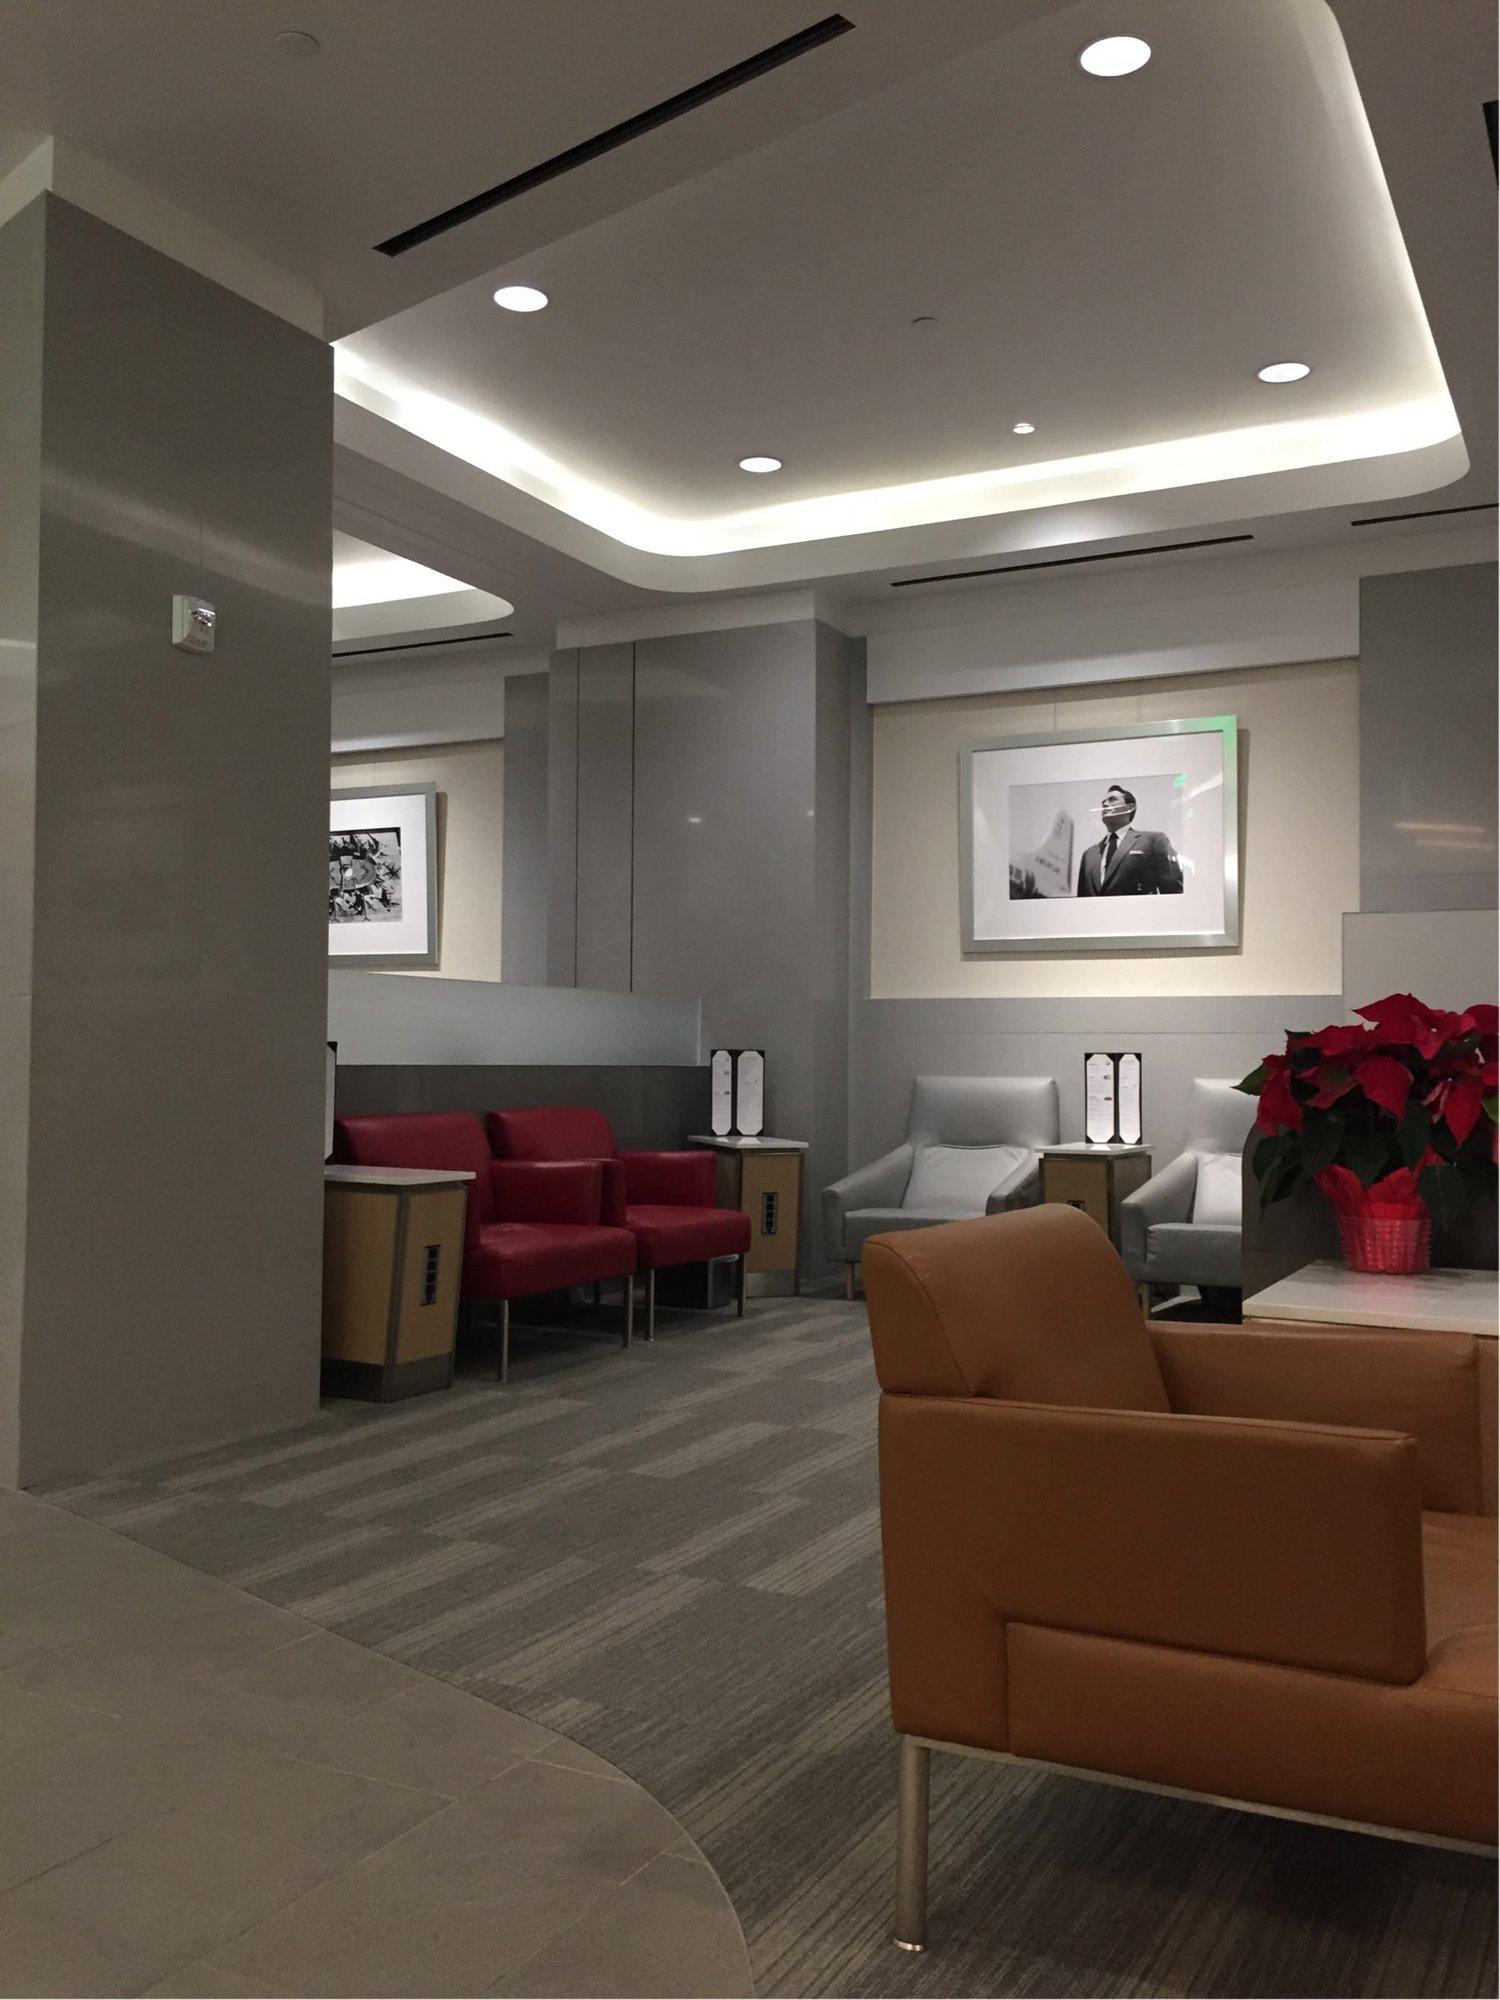 American Airlines Admirals Club image 1 of 43